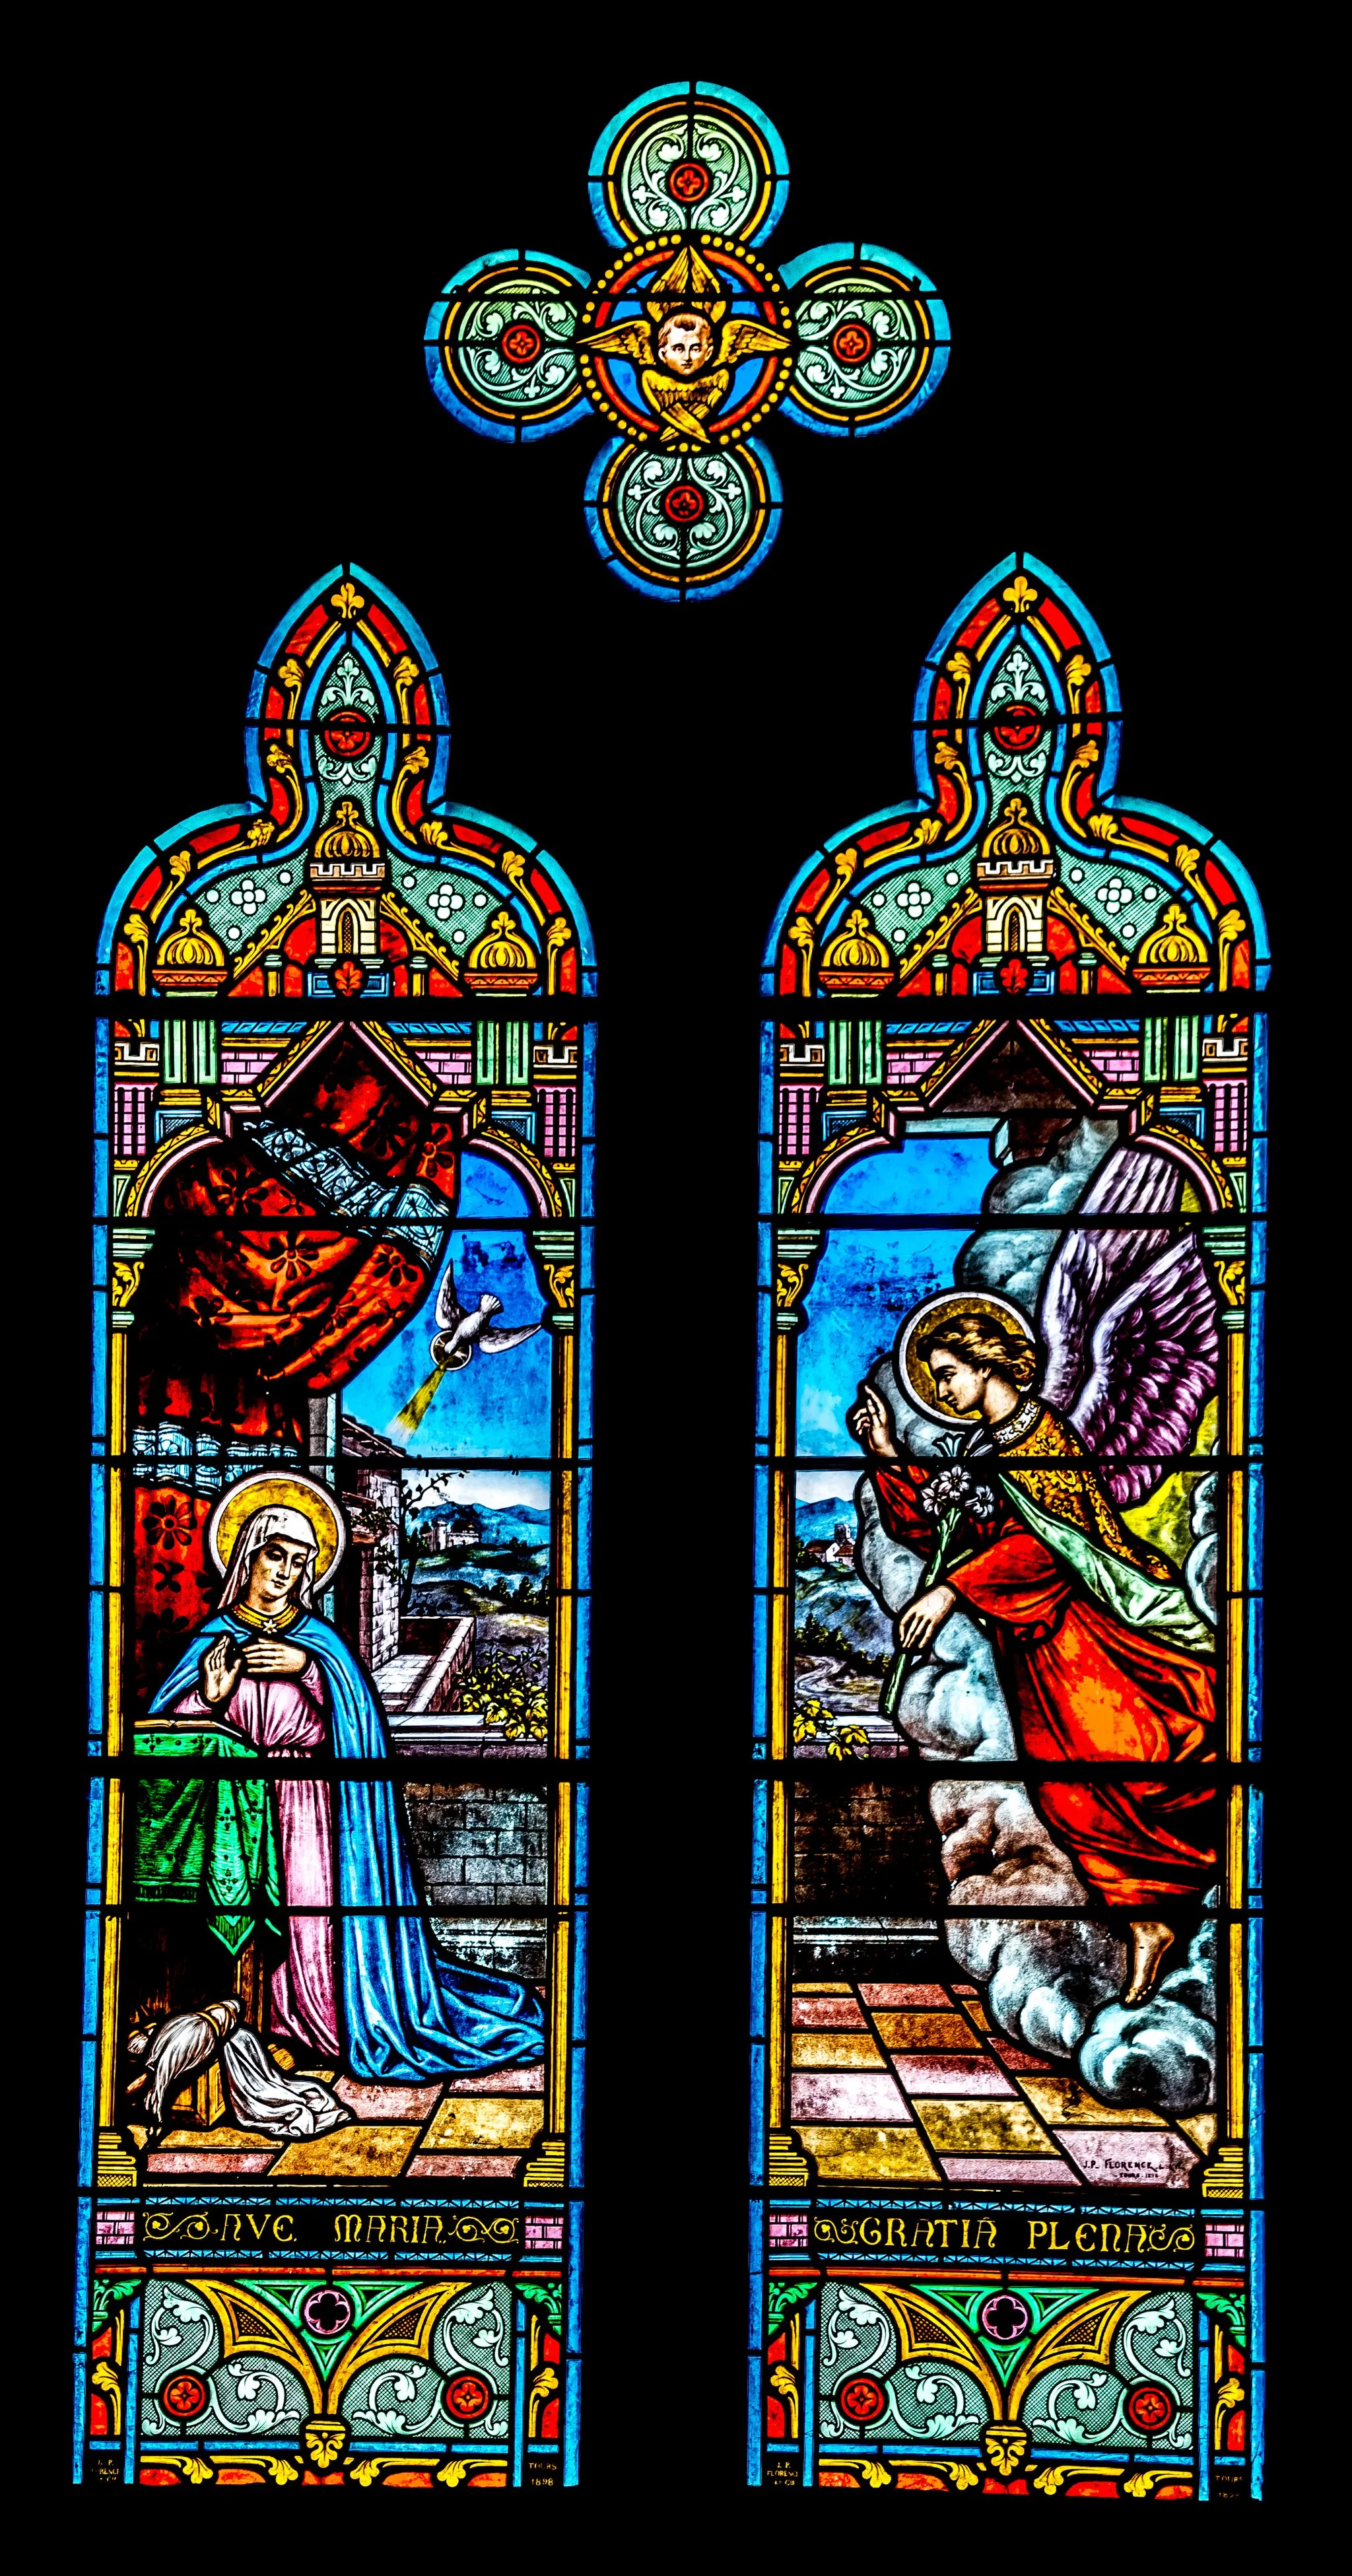 Photo showing: Stained-glass window of the Saint Nicasius church of Bracieux, Loir-et-Cher, France